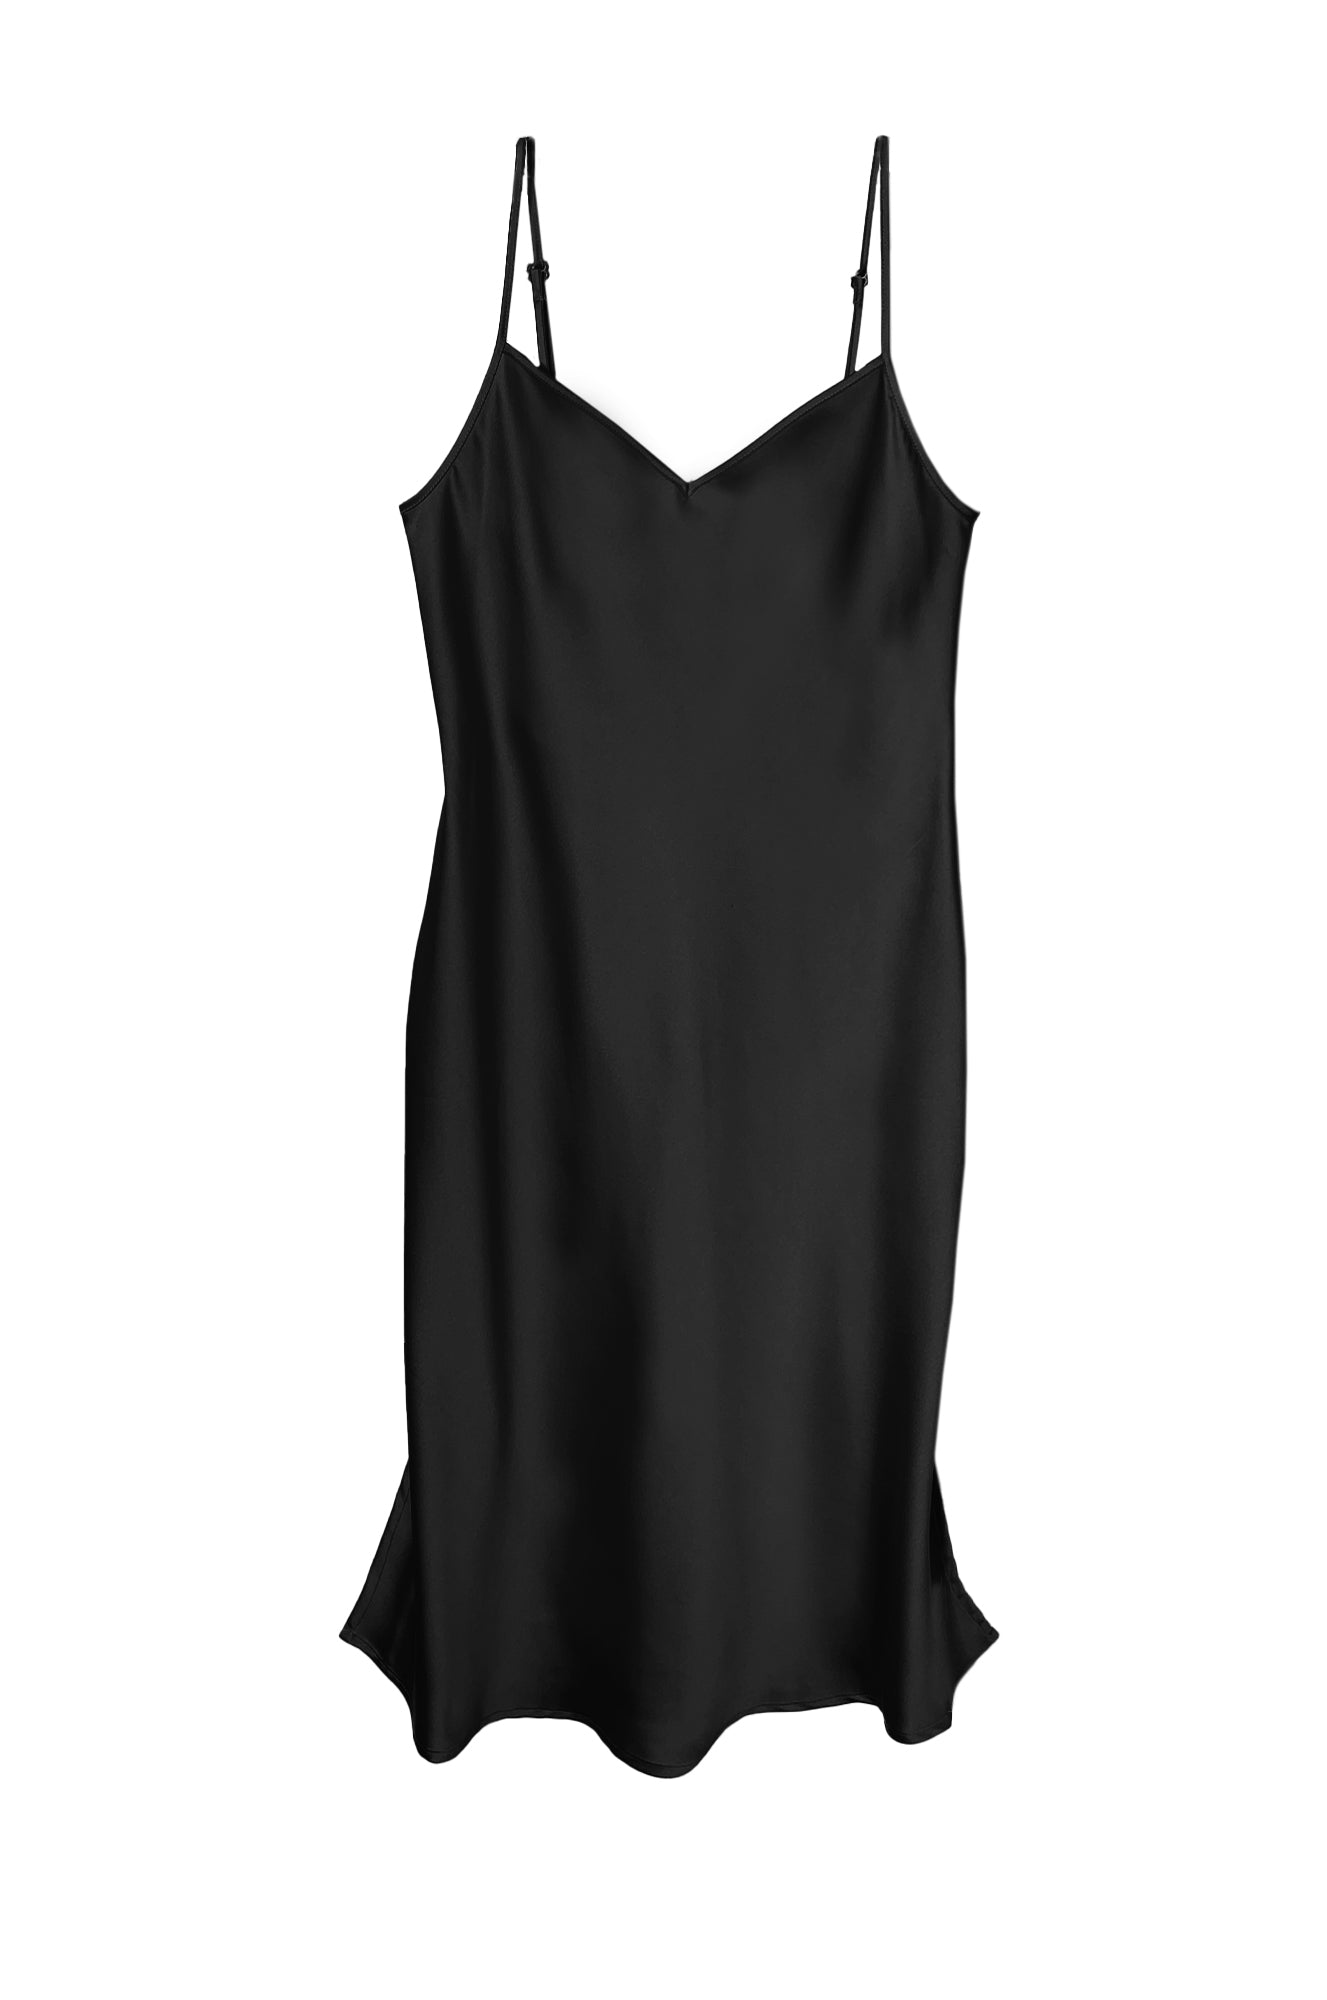 Black bias cut slip dress.  Fit to perfection, the double ply crepe back satin with v-neckline, adjustable straps, and side slits, that flows over your curves, but never clings. Designed for "The True Majority" sizes 10-22 by BAACAL Cynthia Vincent.